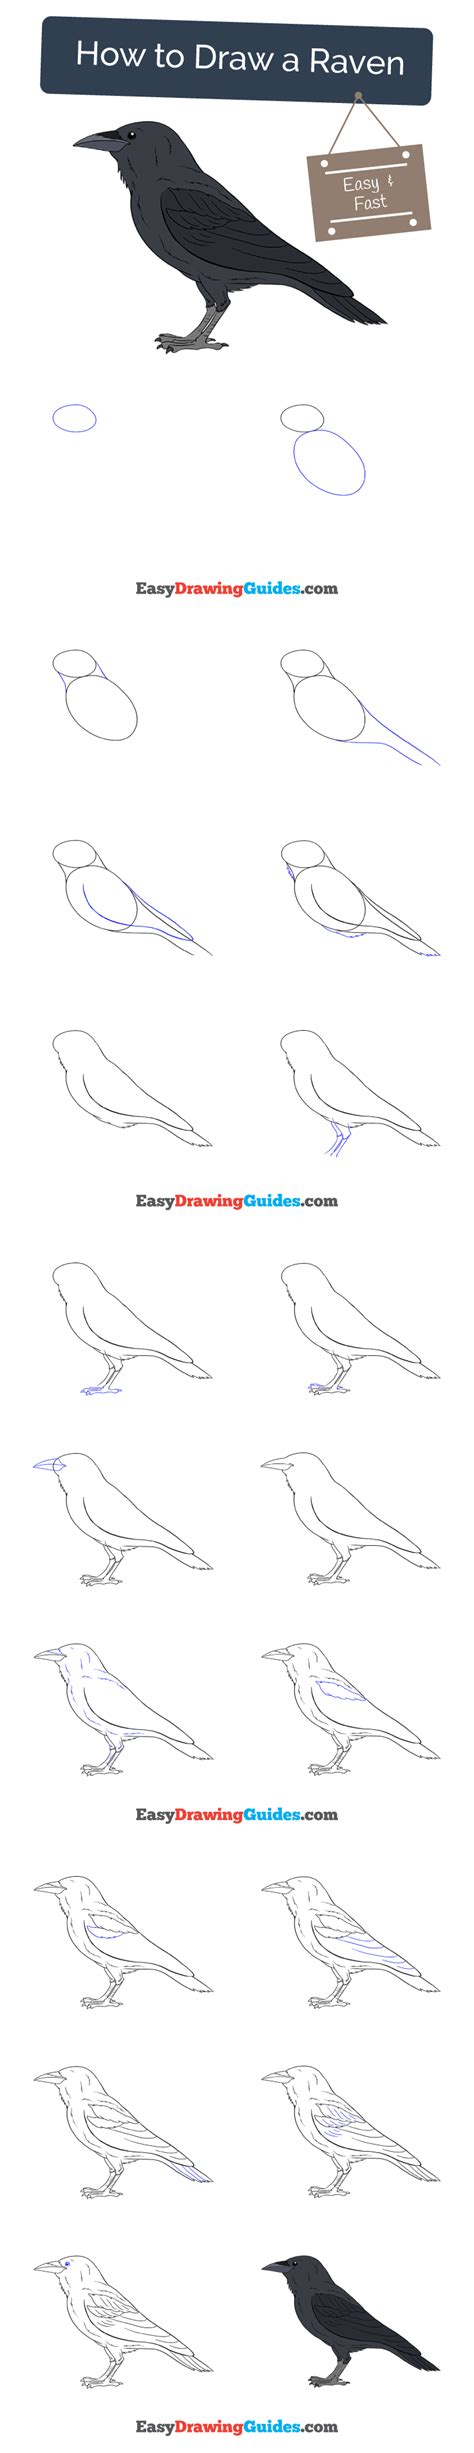 Learn How To Draw A Raven Easy Step By Step Drawing Tutorial For Kids